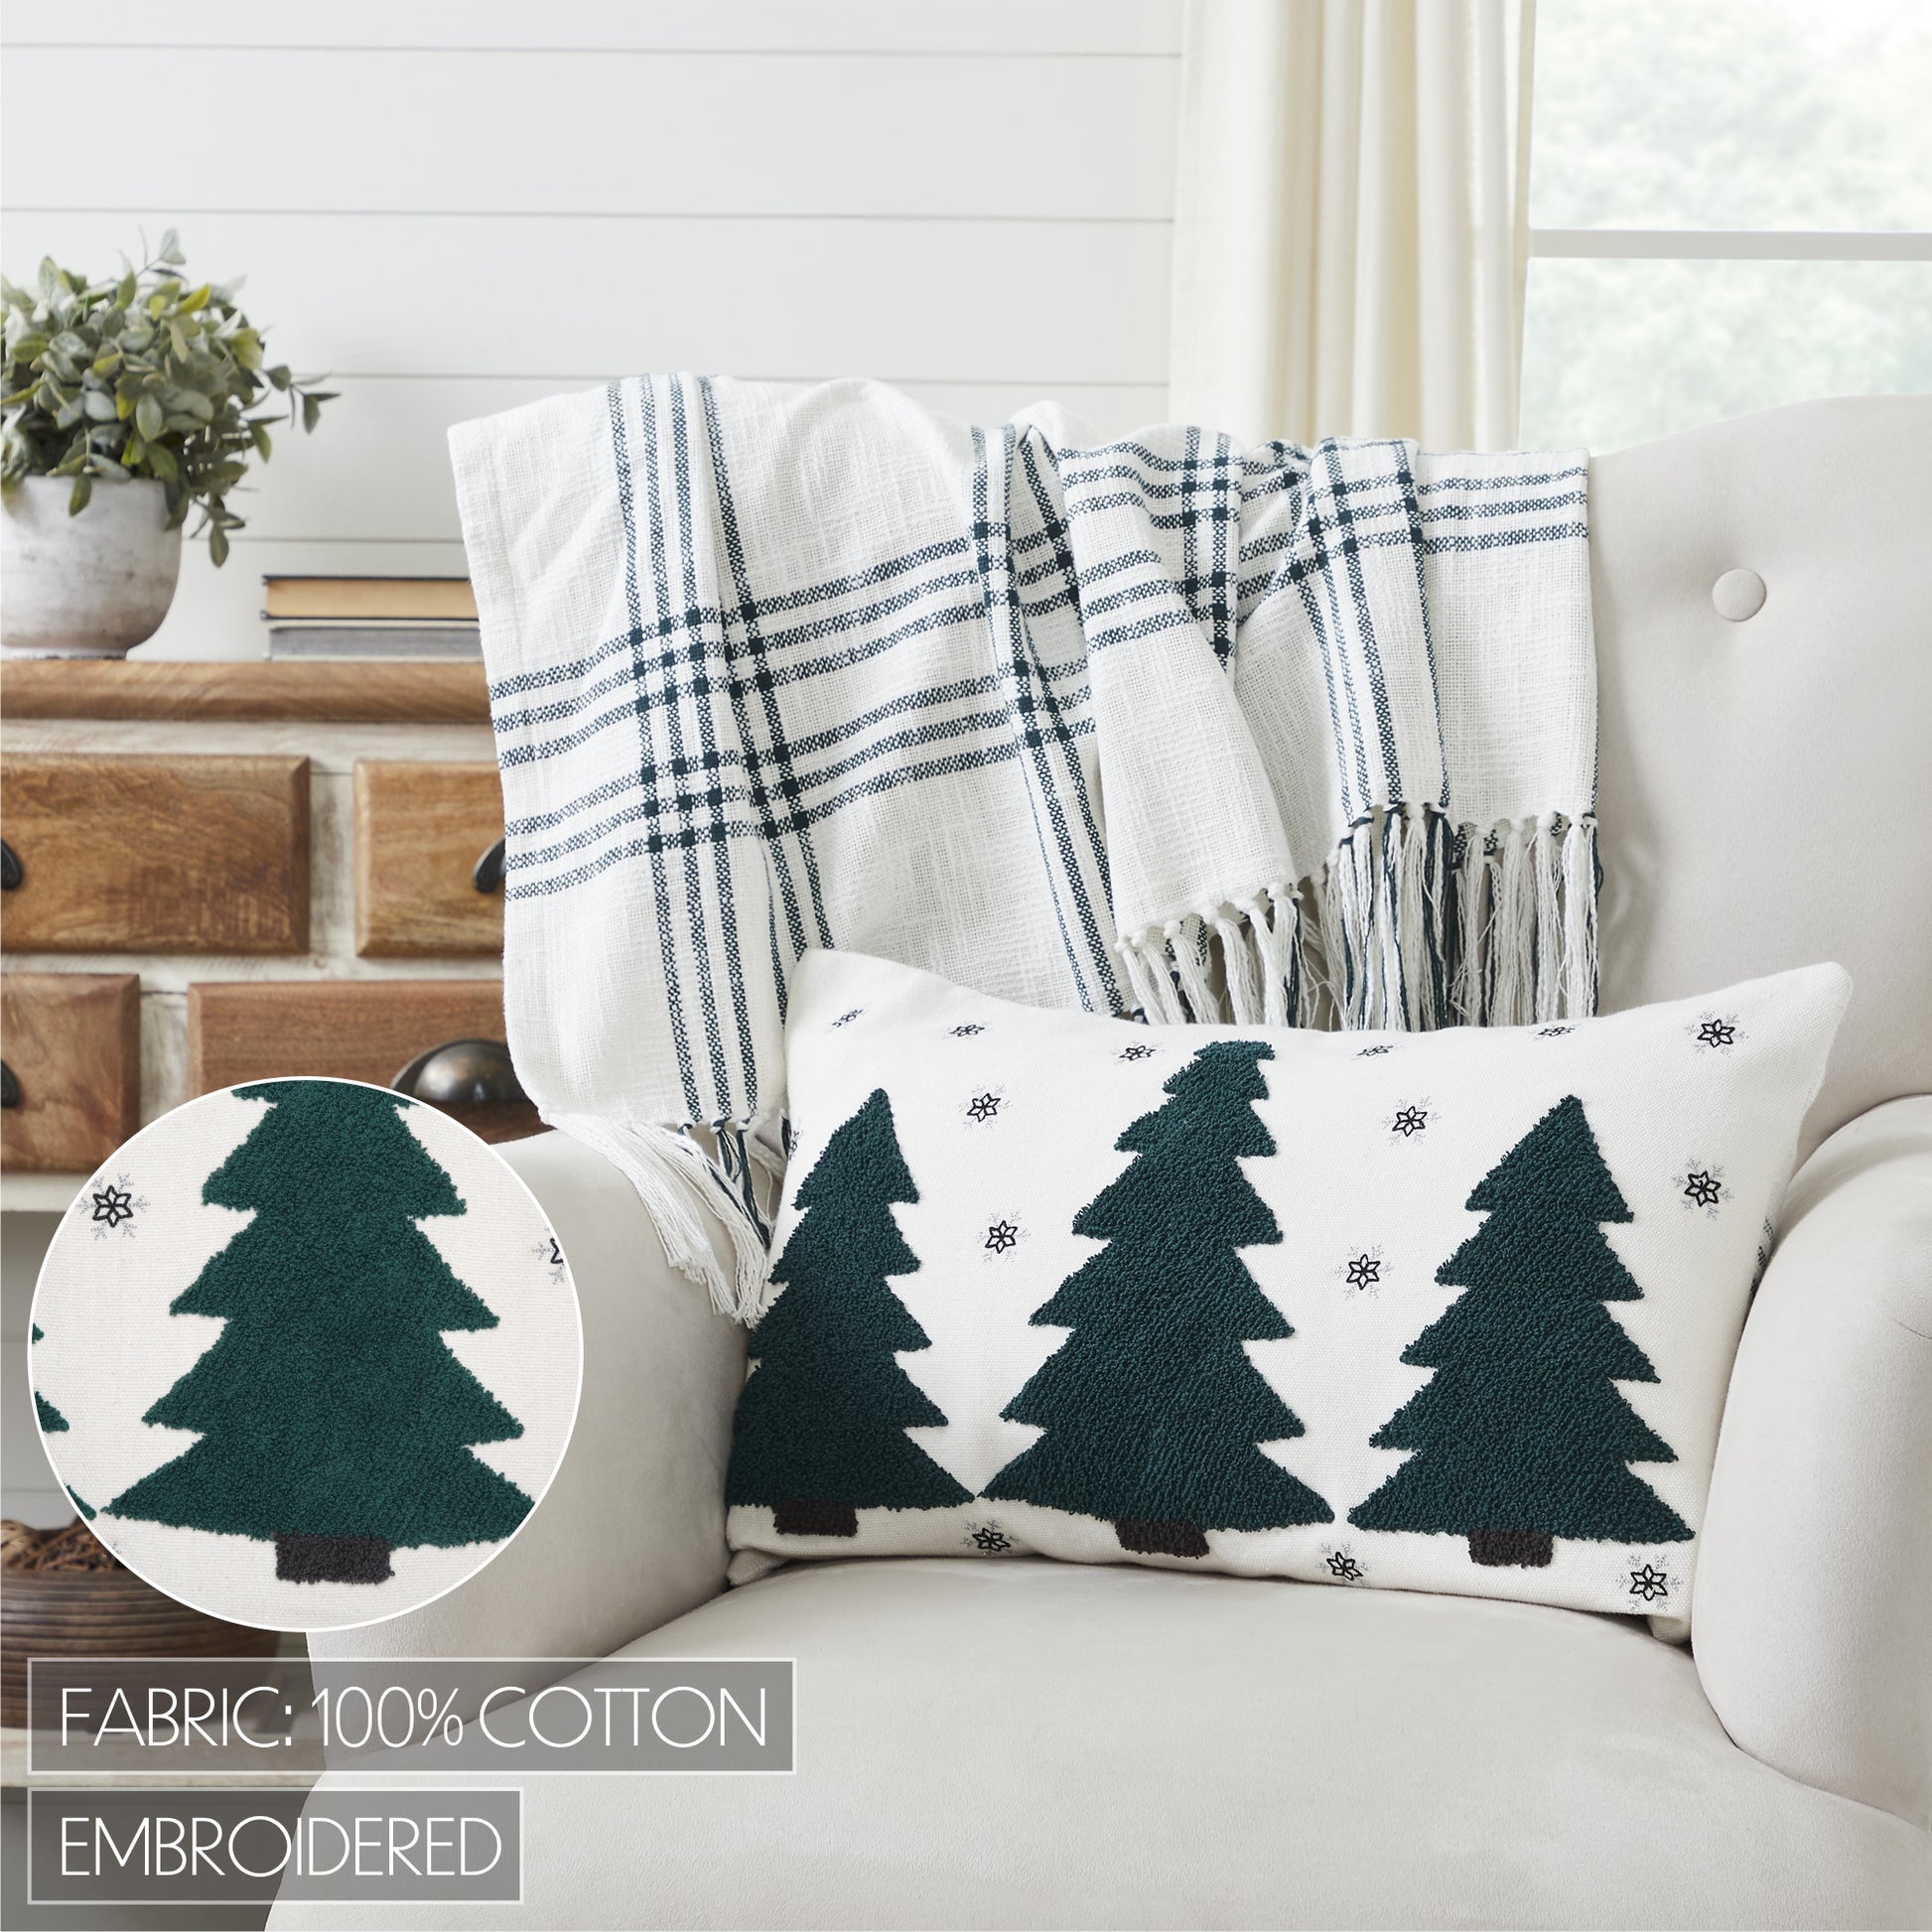 80424-Pine-Grove-Plaid-Embroidered-Trees-Pillow-14x22-image-2